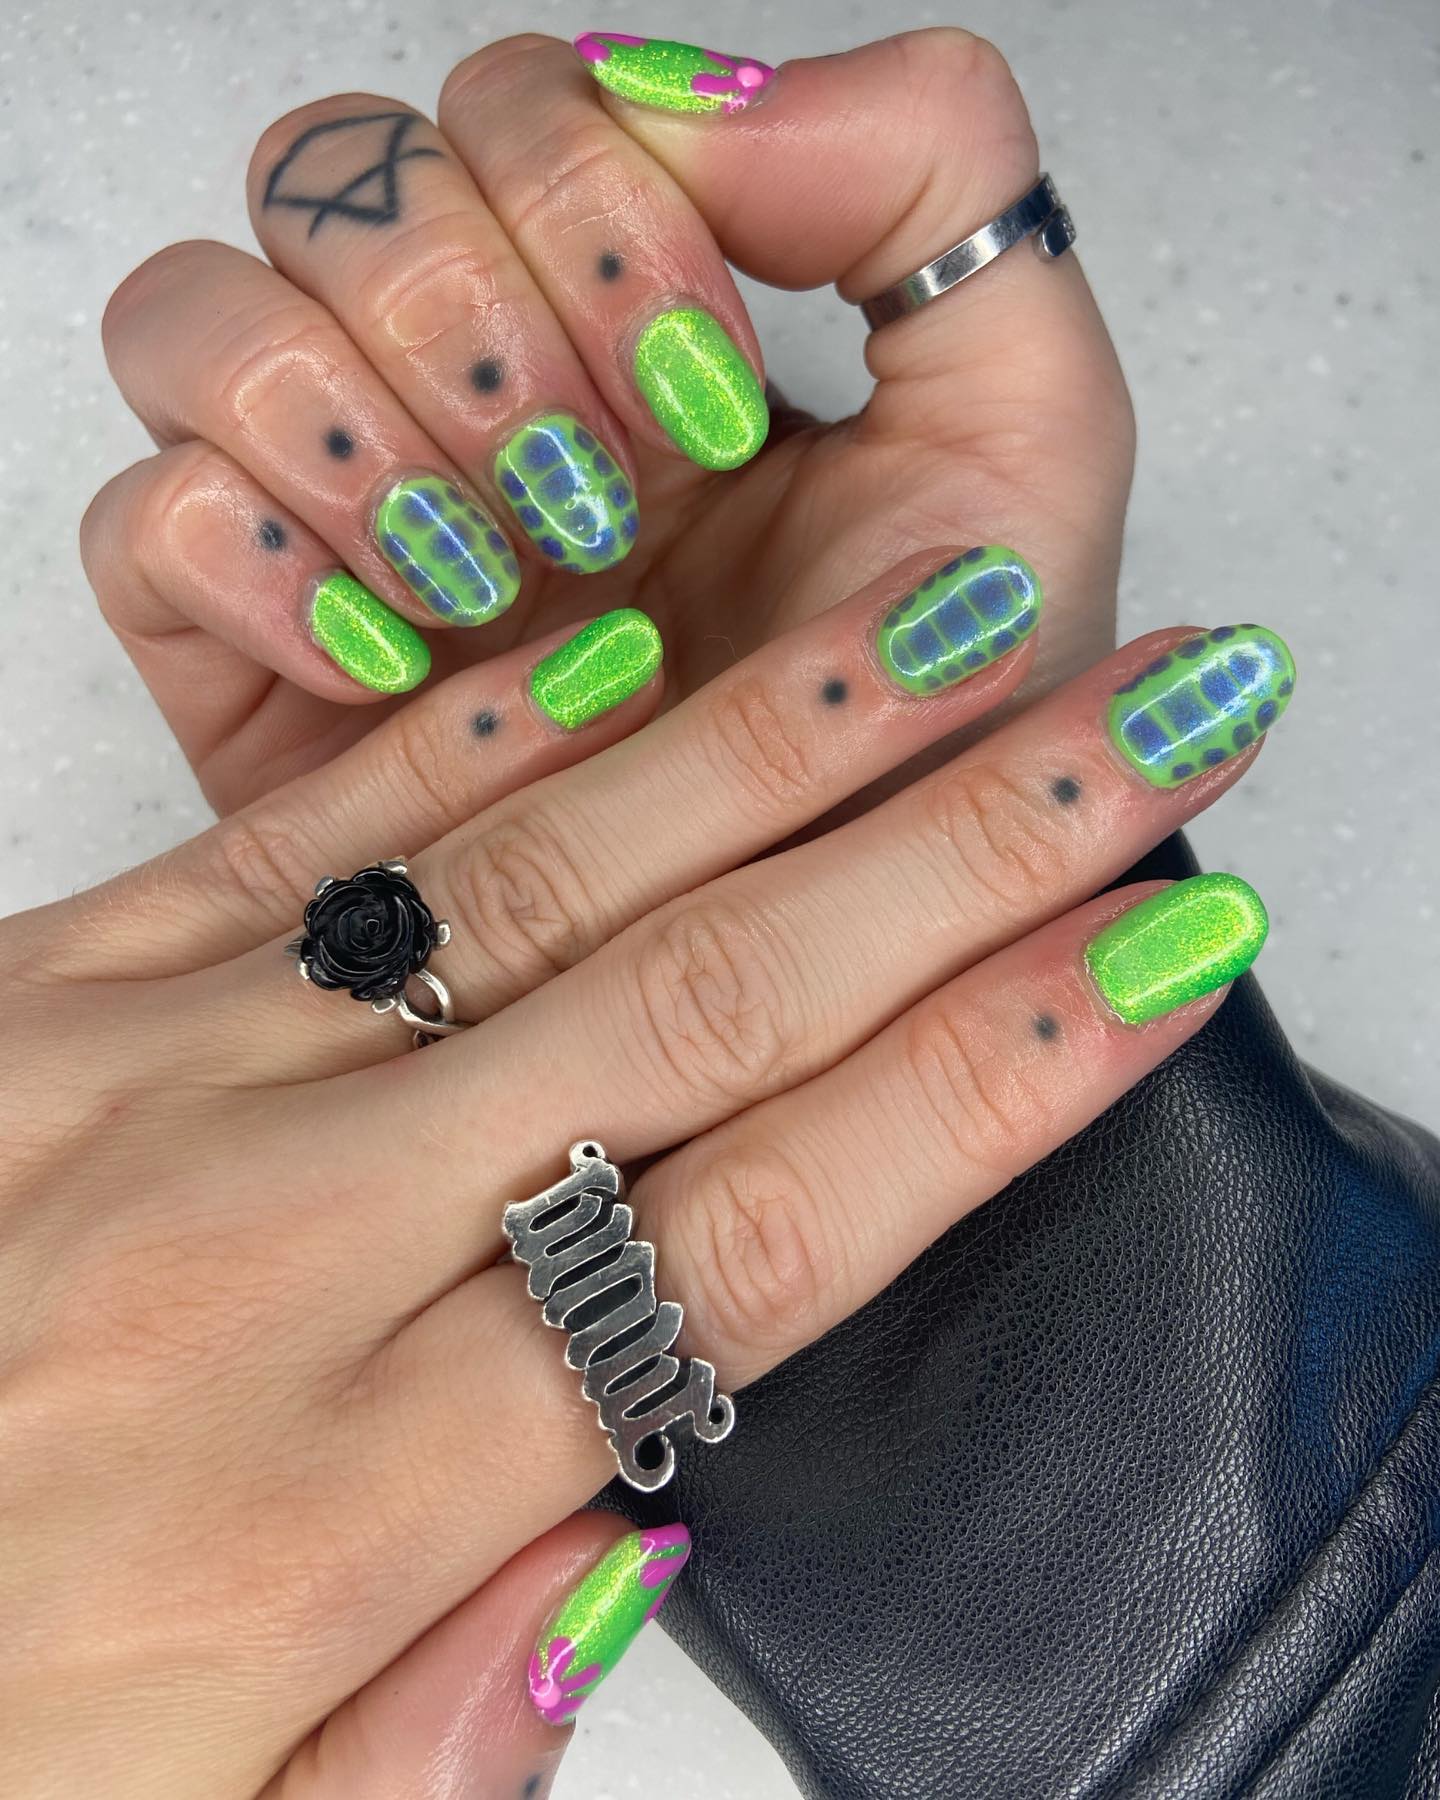 Shiny and glittered green nails help you become the beauty queen but if you want more of that, maybe you can use some nail art like this.